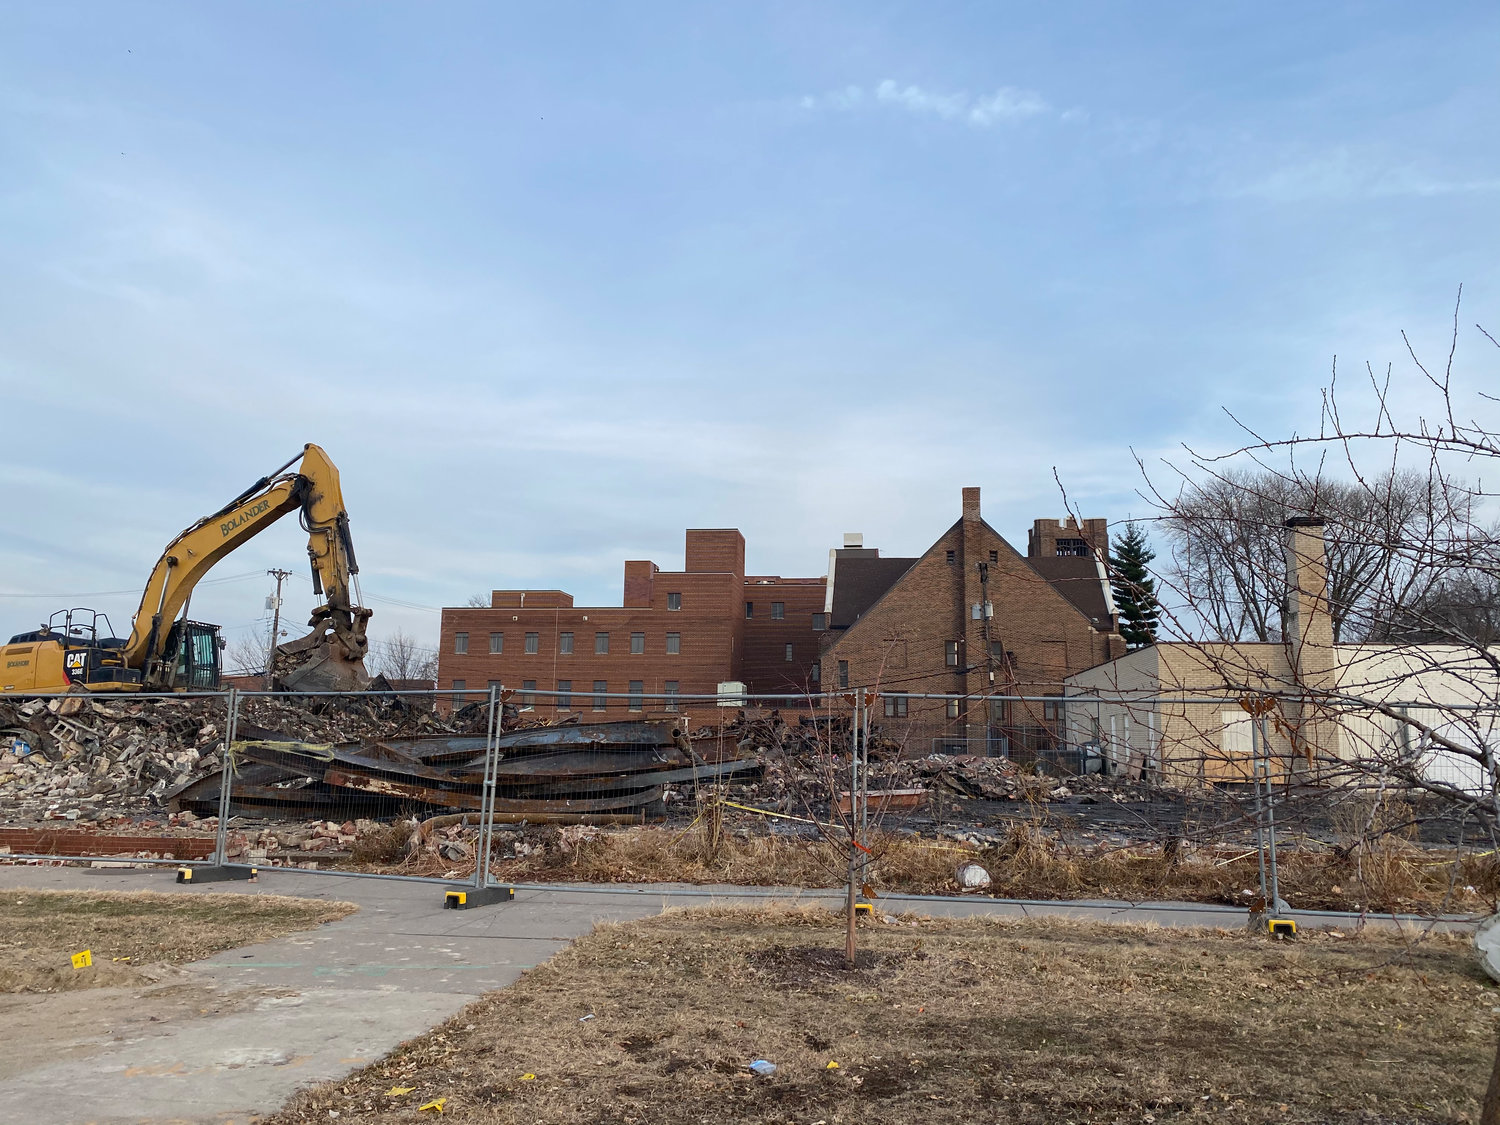 The Minnehaha Post Office building was demolished on Dec. 10, 2020 after it was destroyed by fire six months earlier in the civil uprising after George Floyd's death.